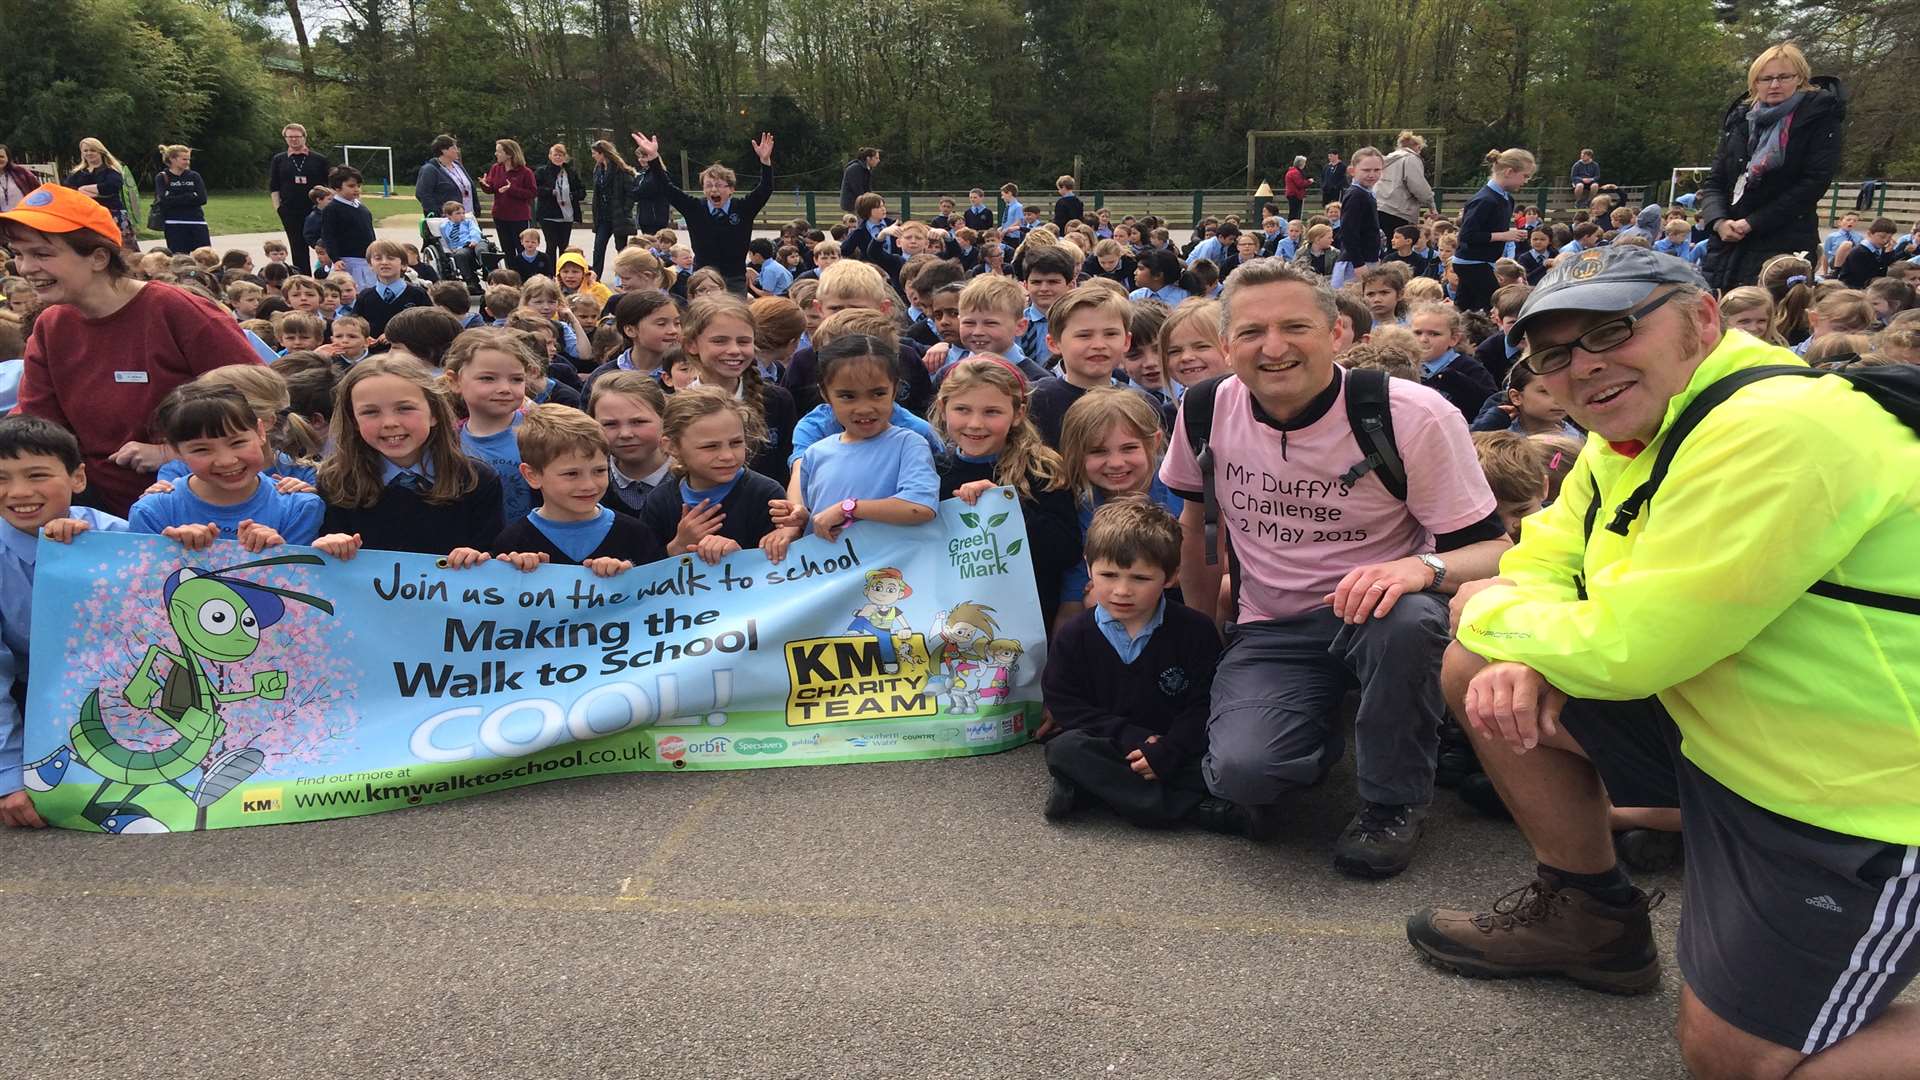 Mr Duffy and Mr Newman received a warm welcome from the 21 Sevenoaks schools they visited during the sponsored walk.